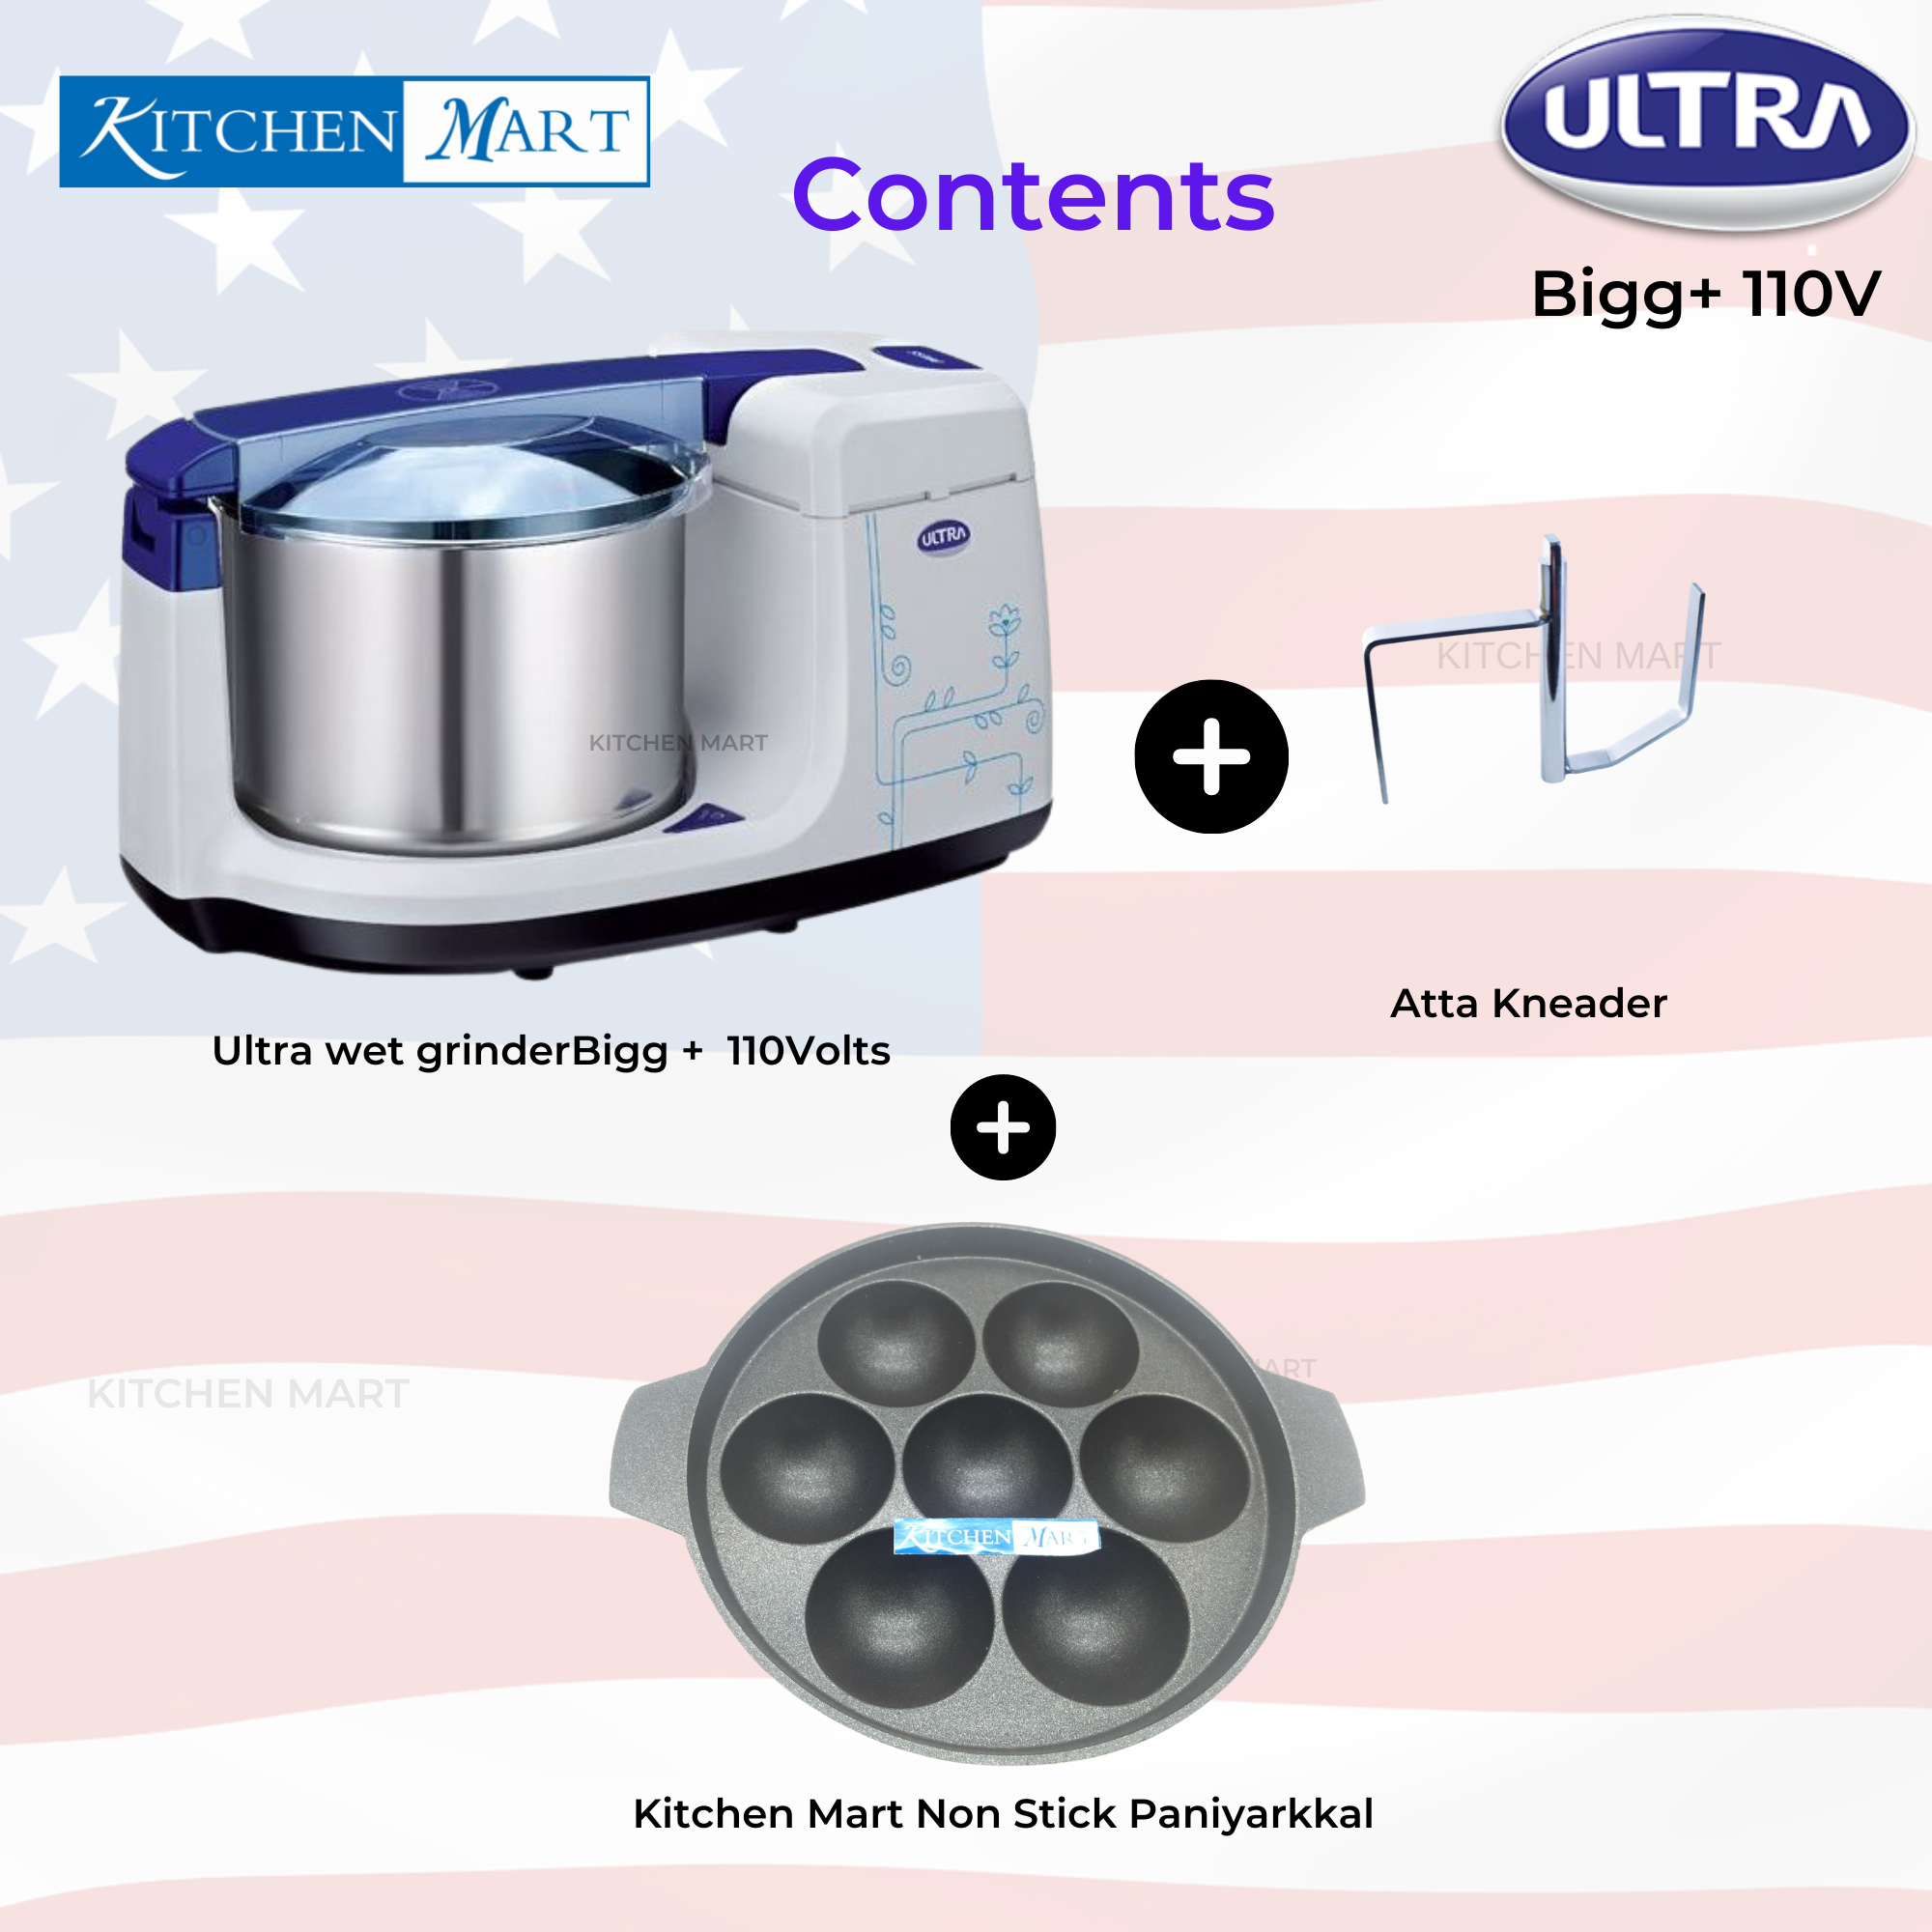 Elgi Ultra Bigg+ Table Top Wet Grinder 2.5 Litres, 110volts for use in USA & Canada